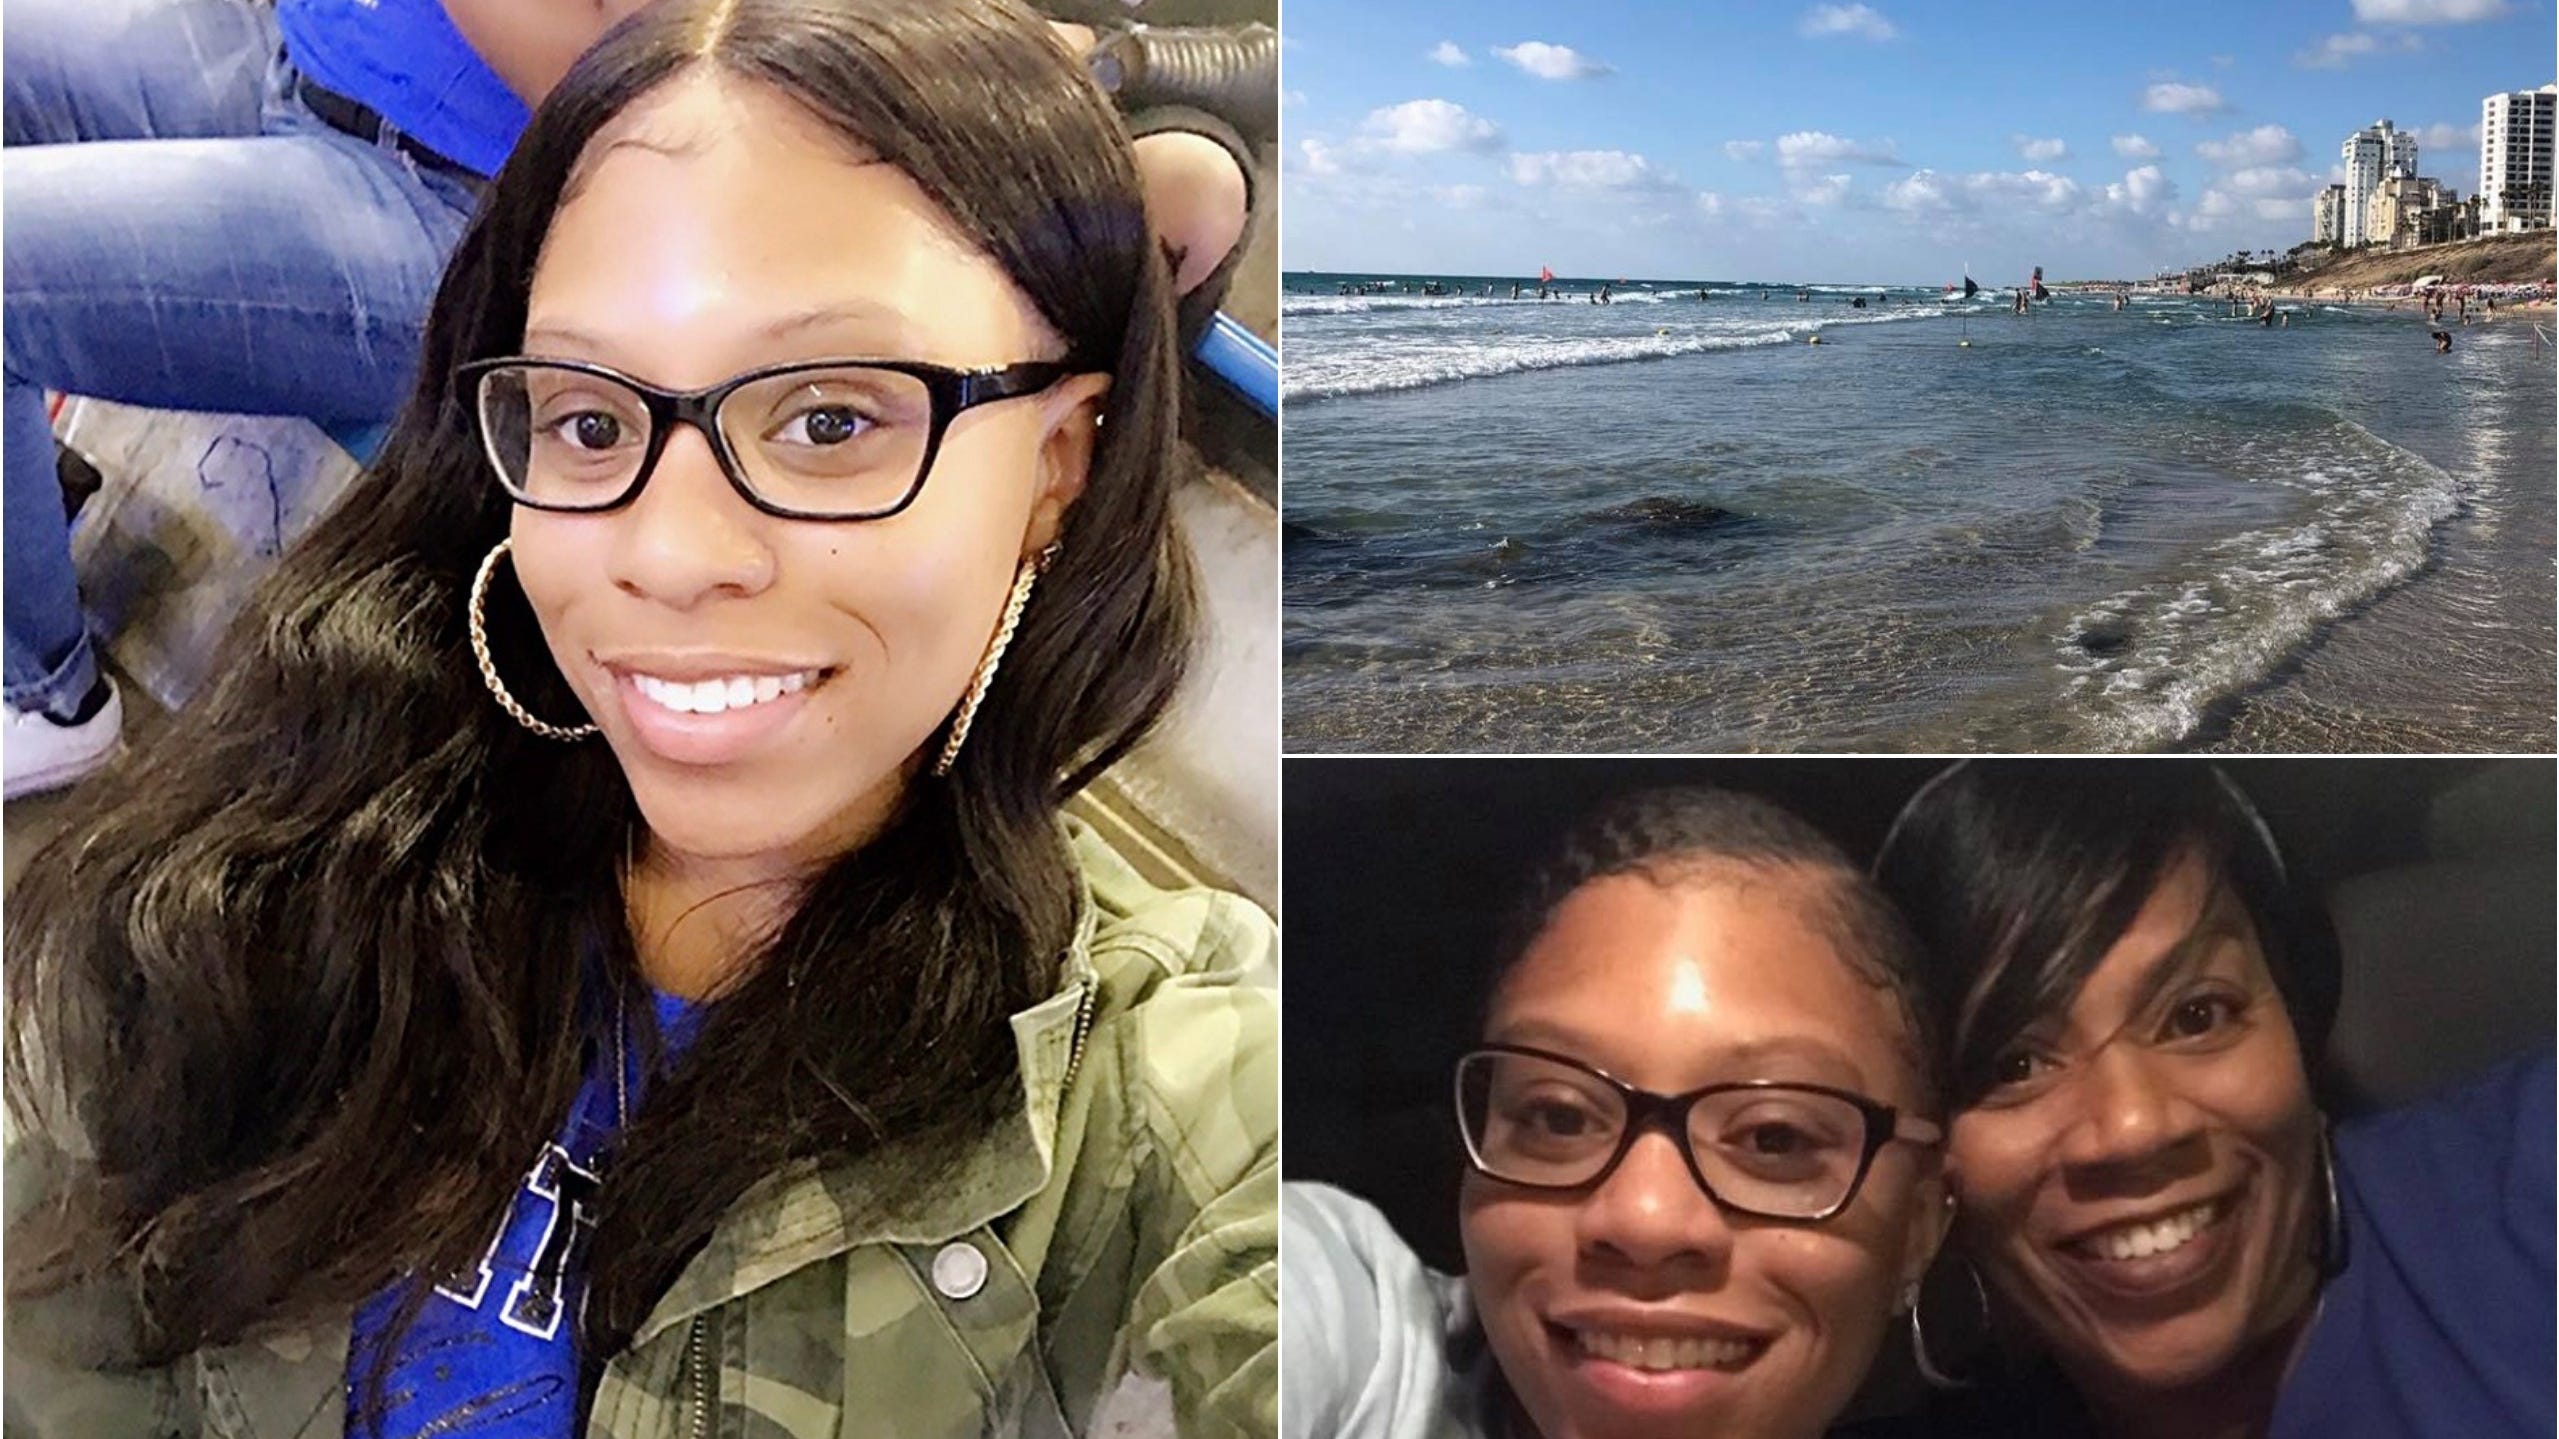 Florida college student missing in Israel disappeared while swimming at Tel Aviv beach